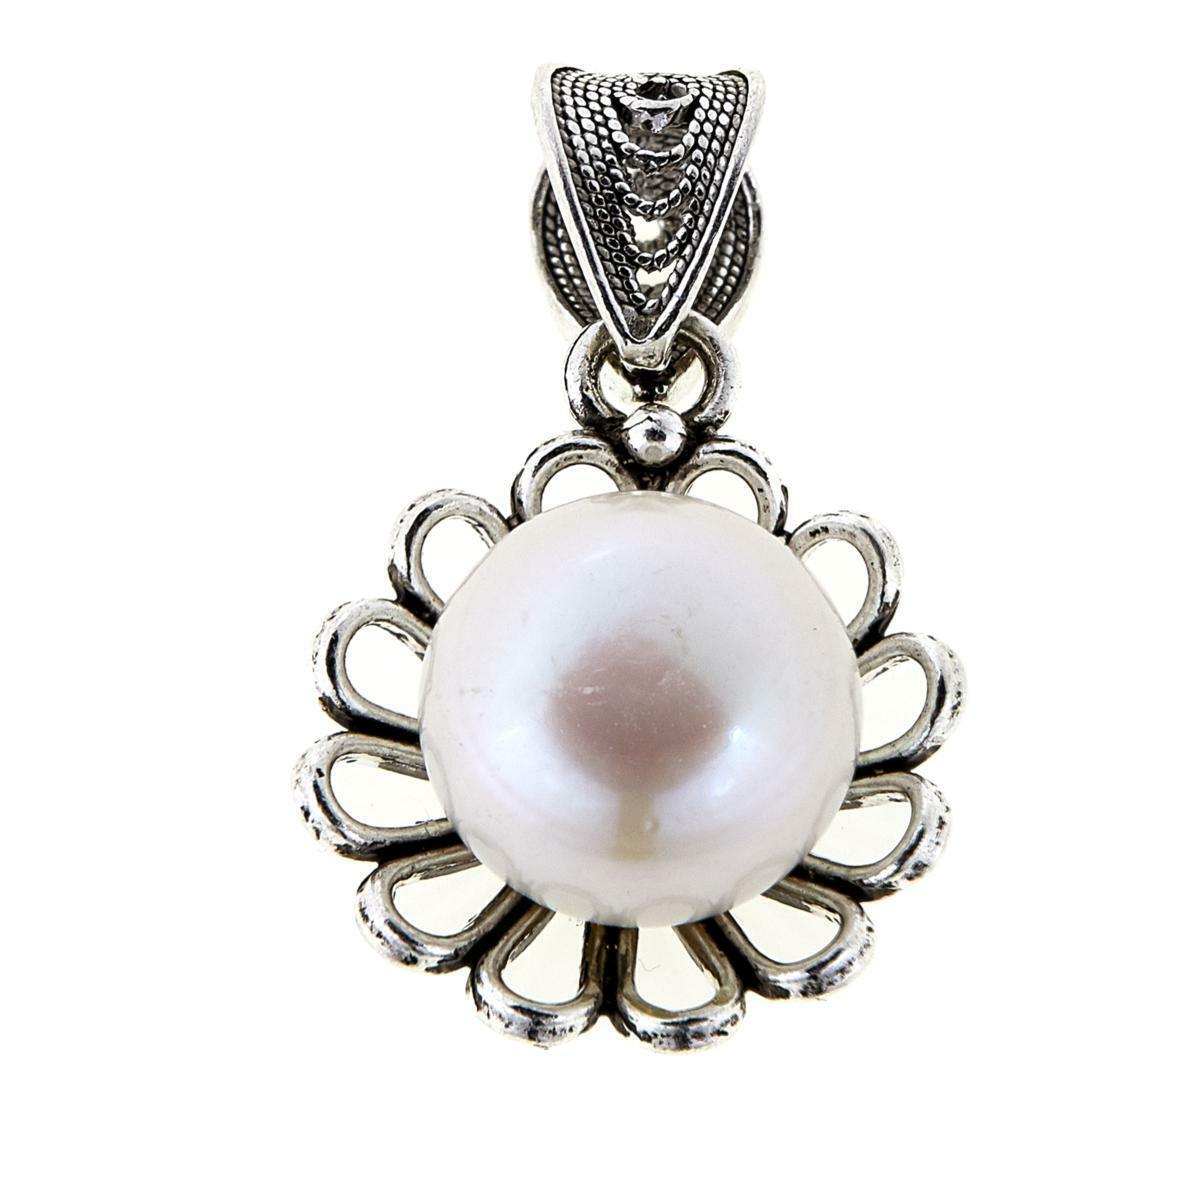 Ottoman Silver Jewelry White 12mm Cultured Pearl Flower Pendant